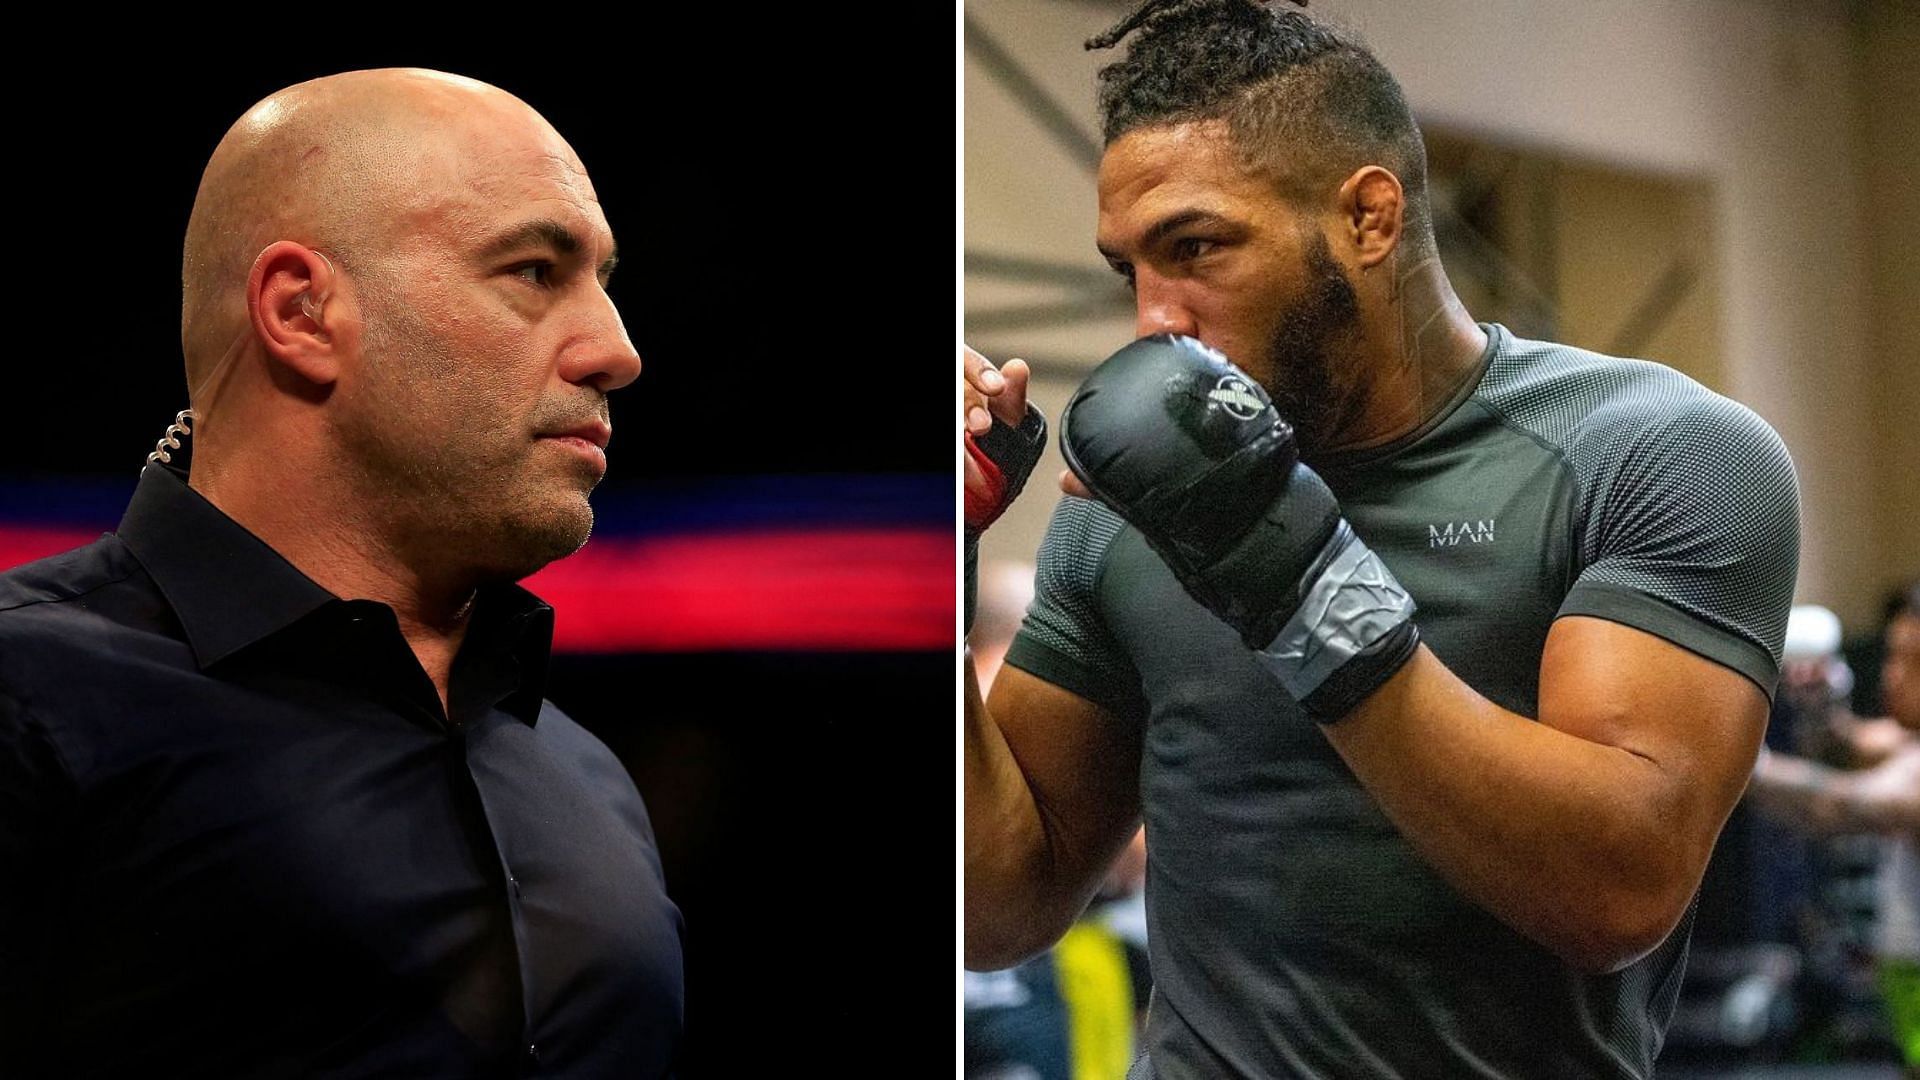 Joe Rogan (Left) and Kevin Lee (Right) [Images courtesy of Getty and Kevin Lee Instagram]